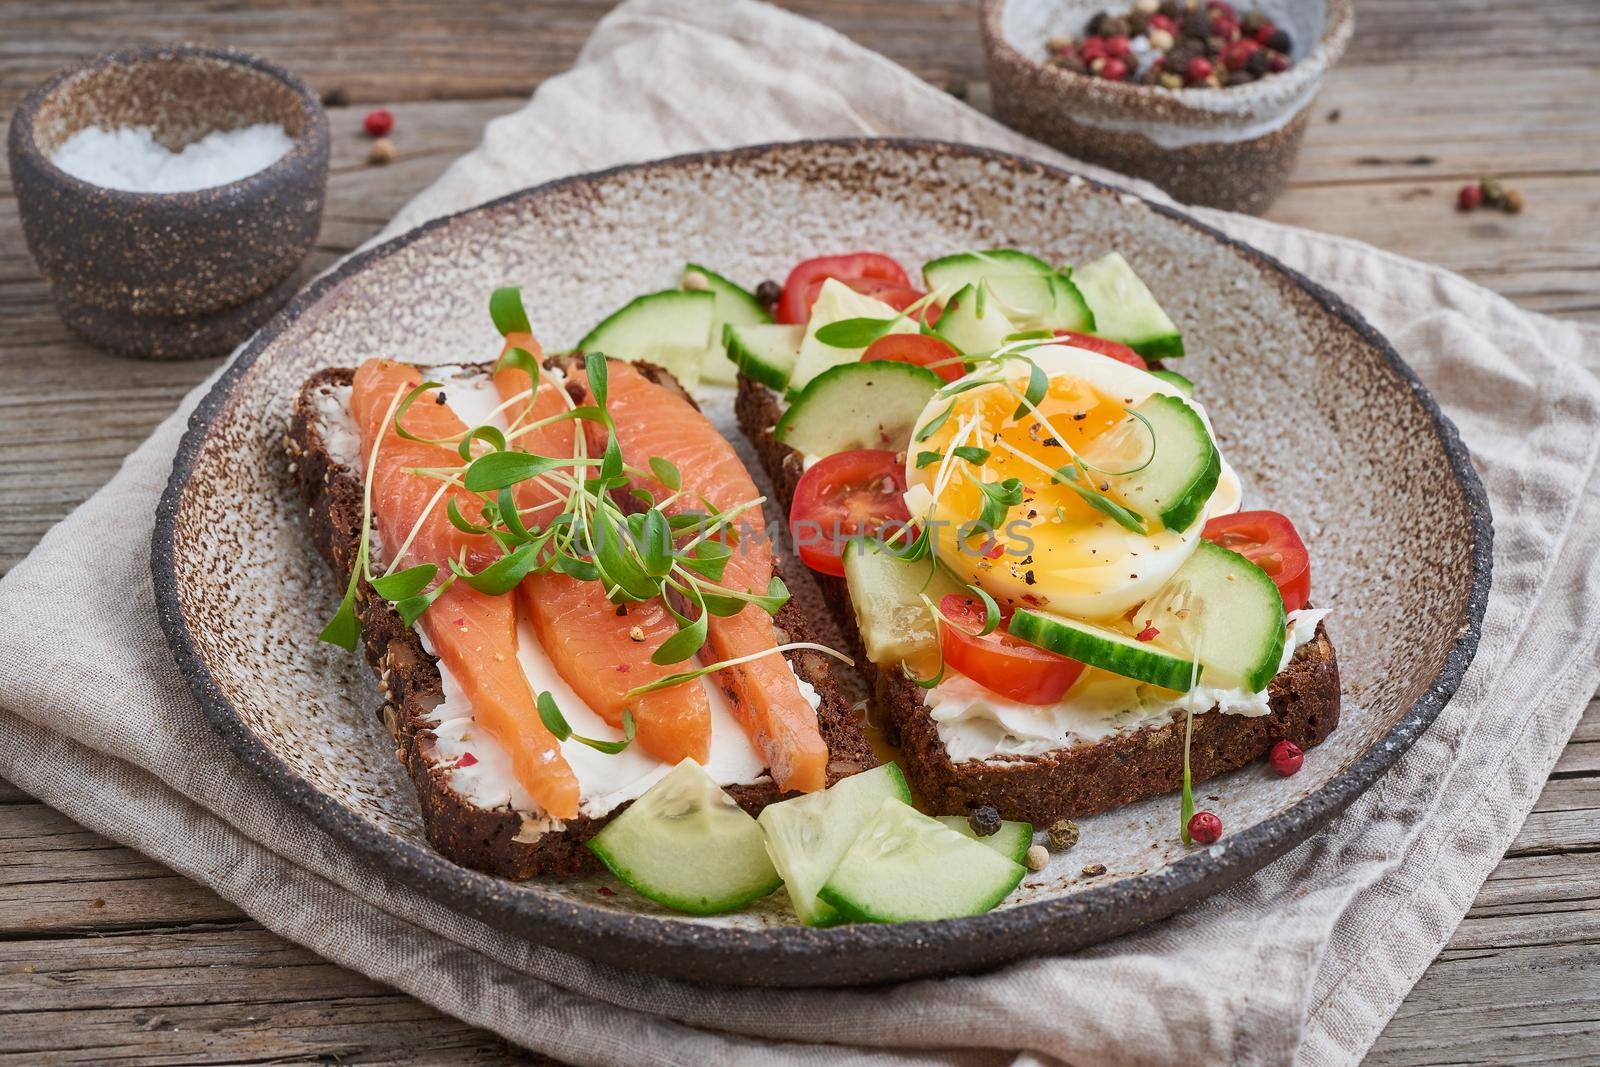 Smorrebrod - traditional Danish sandwiches. Black rye bread with salmon, cream cheese, cucumber, tomatoes on a wooden background